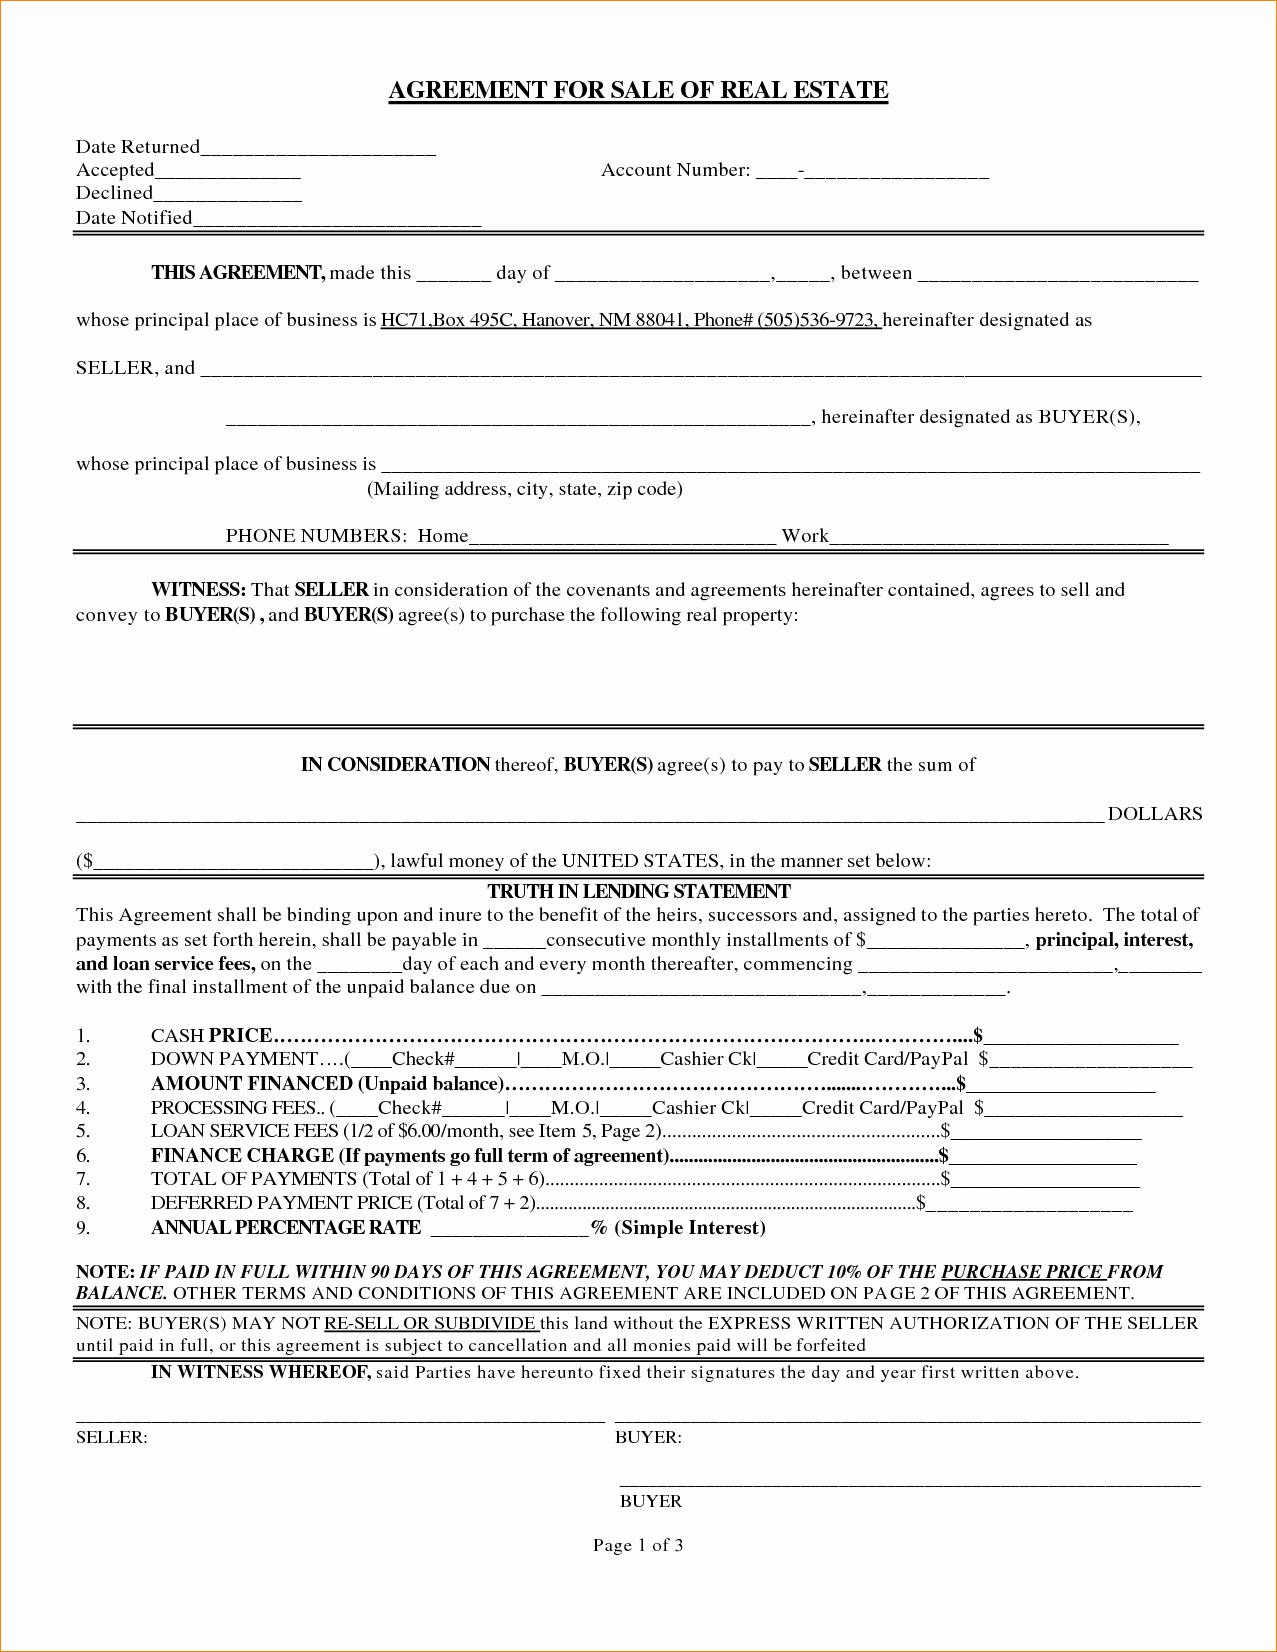 Simple Agreement Contract 30 Simple Real Estate Contract Tate Publishing News